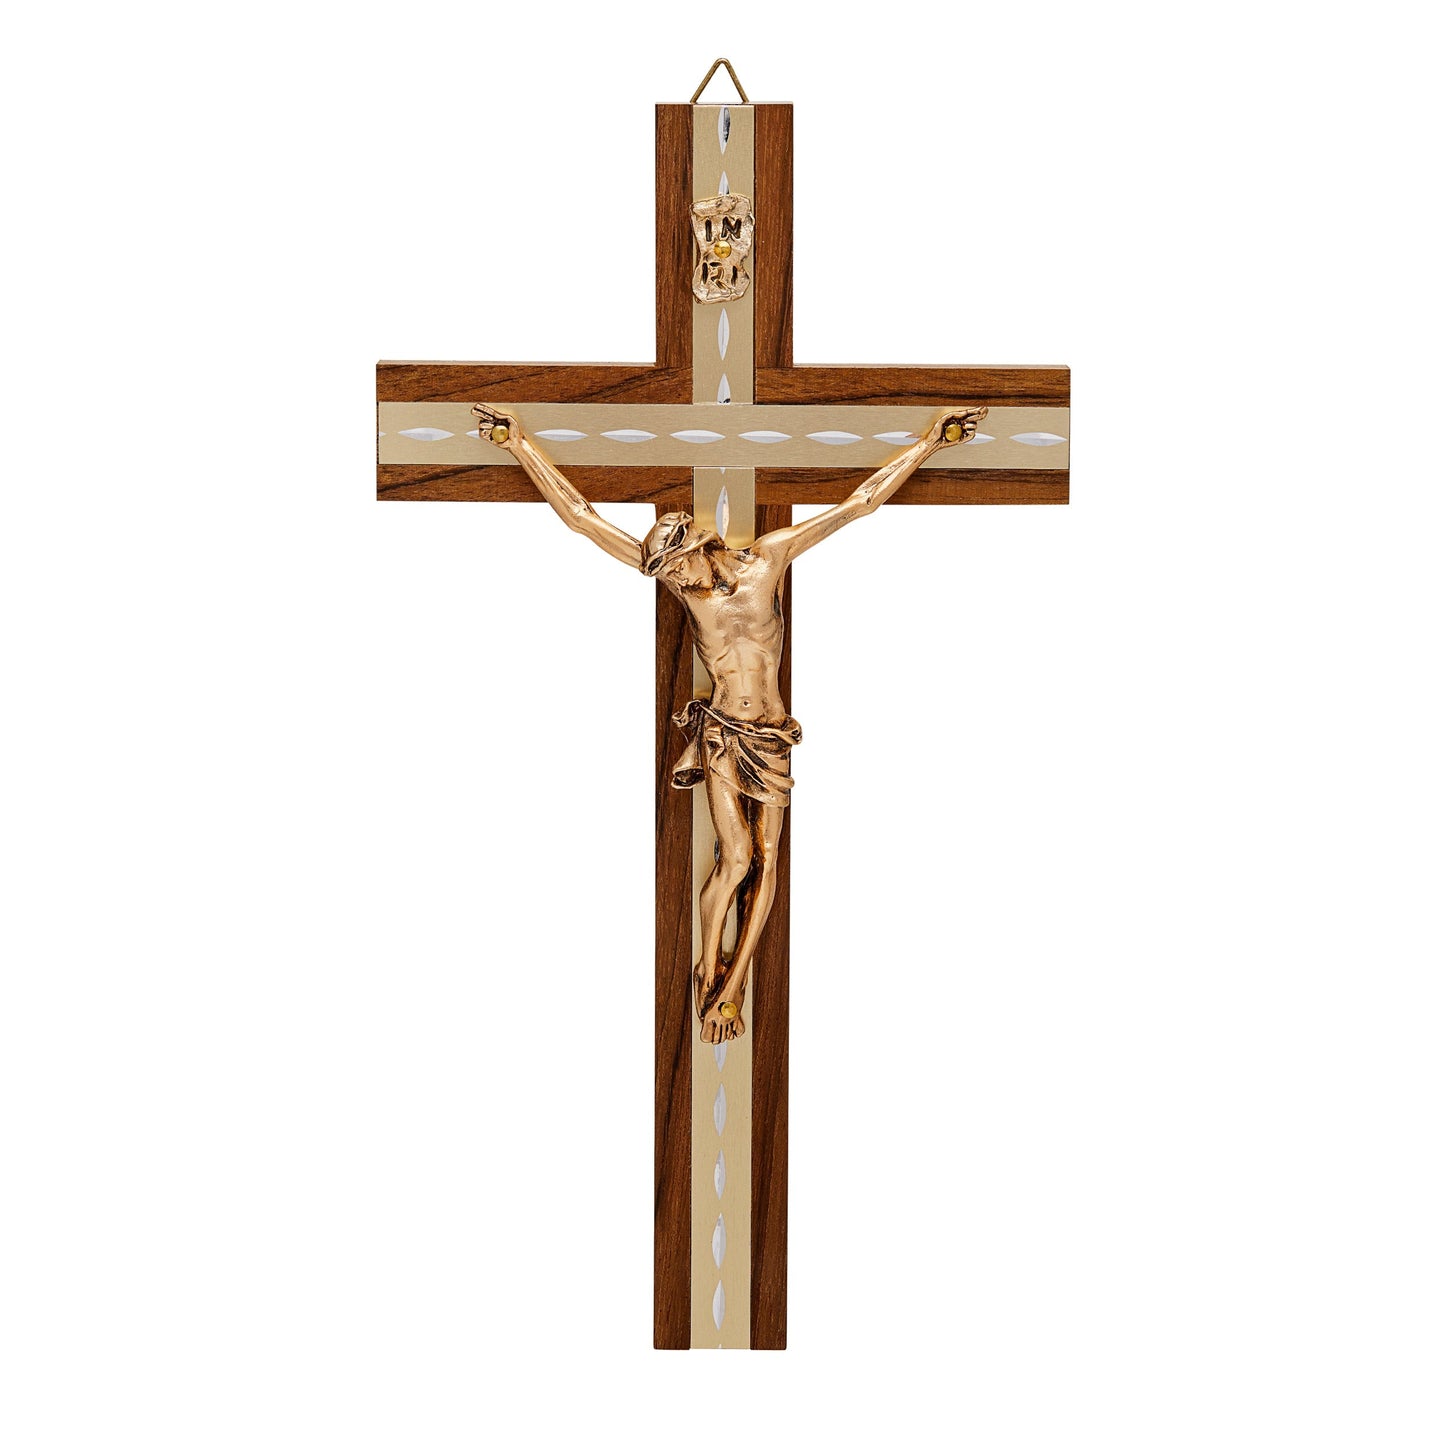 MONDO CATTOLICO Walnut Crucifix With Inlays and Gold Details